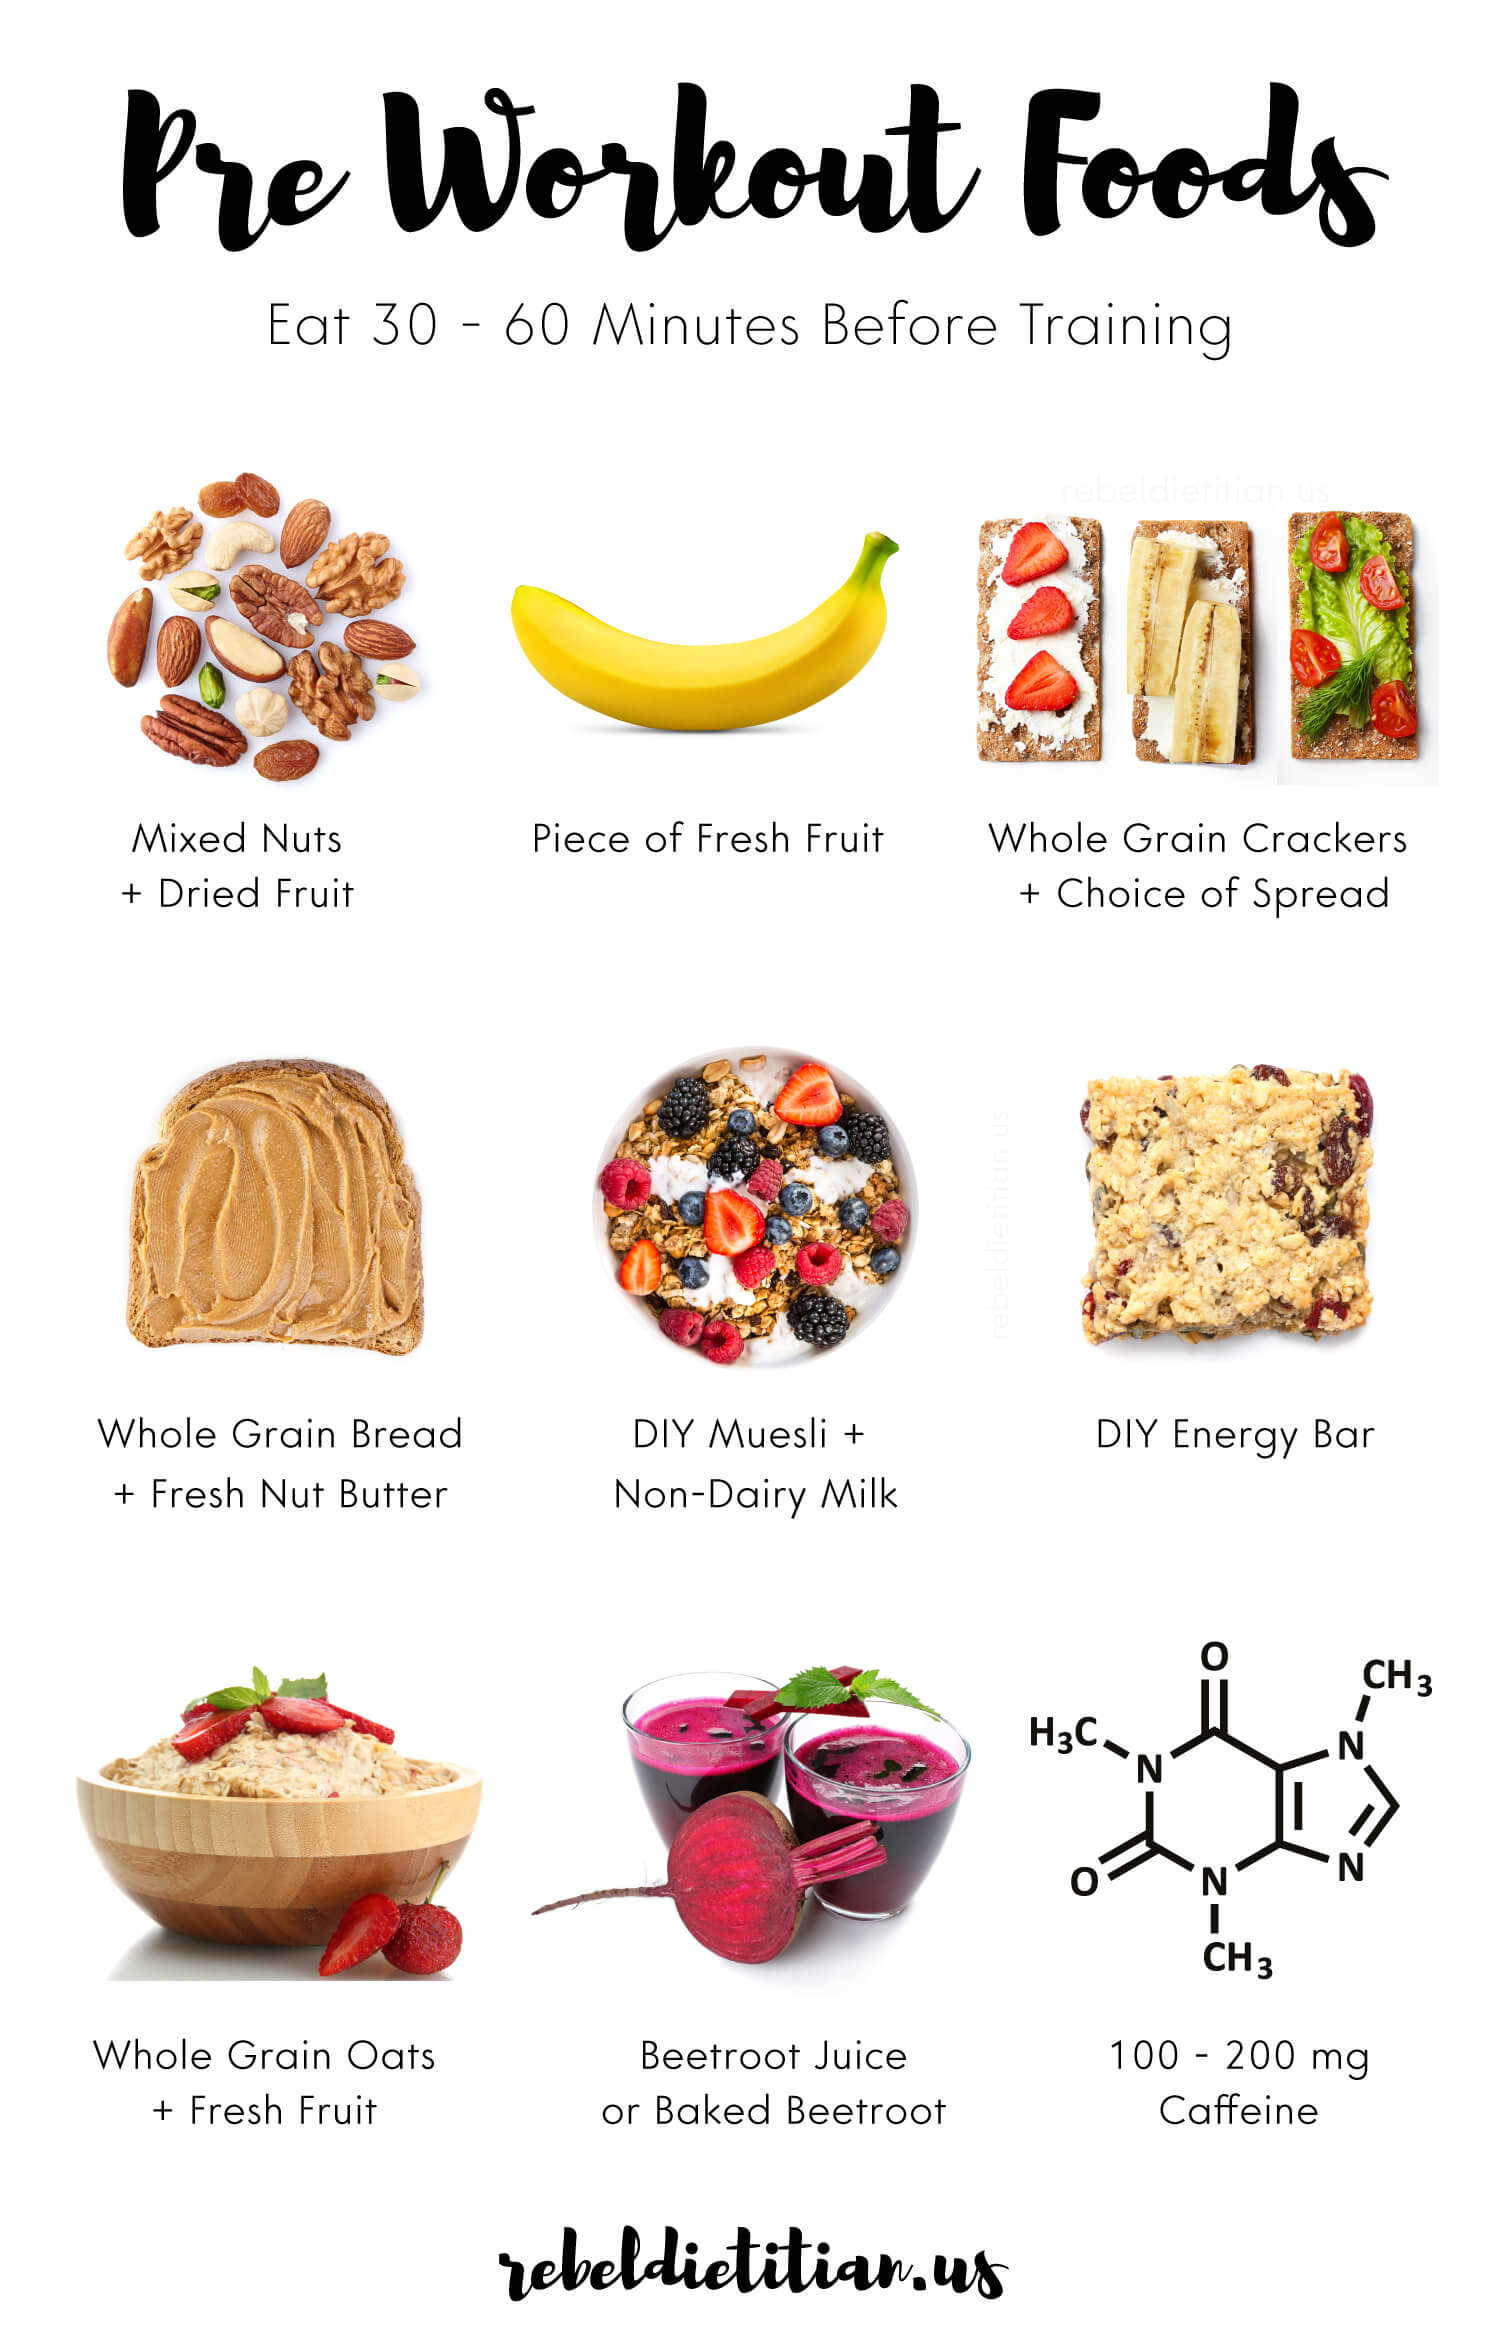 Pre Workout Foods | RebelRD